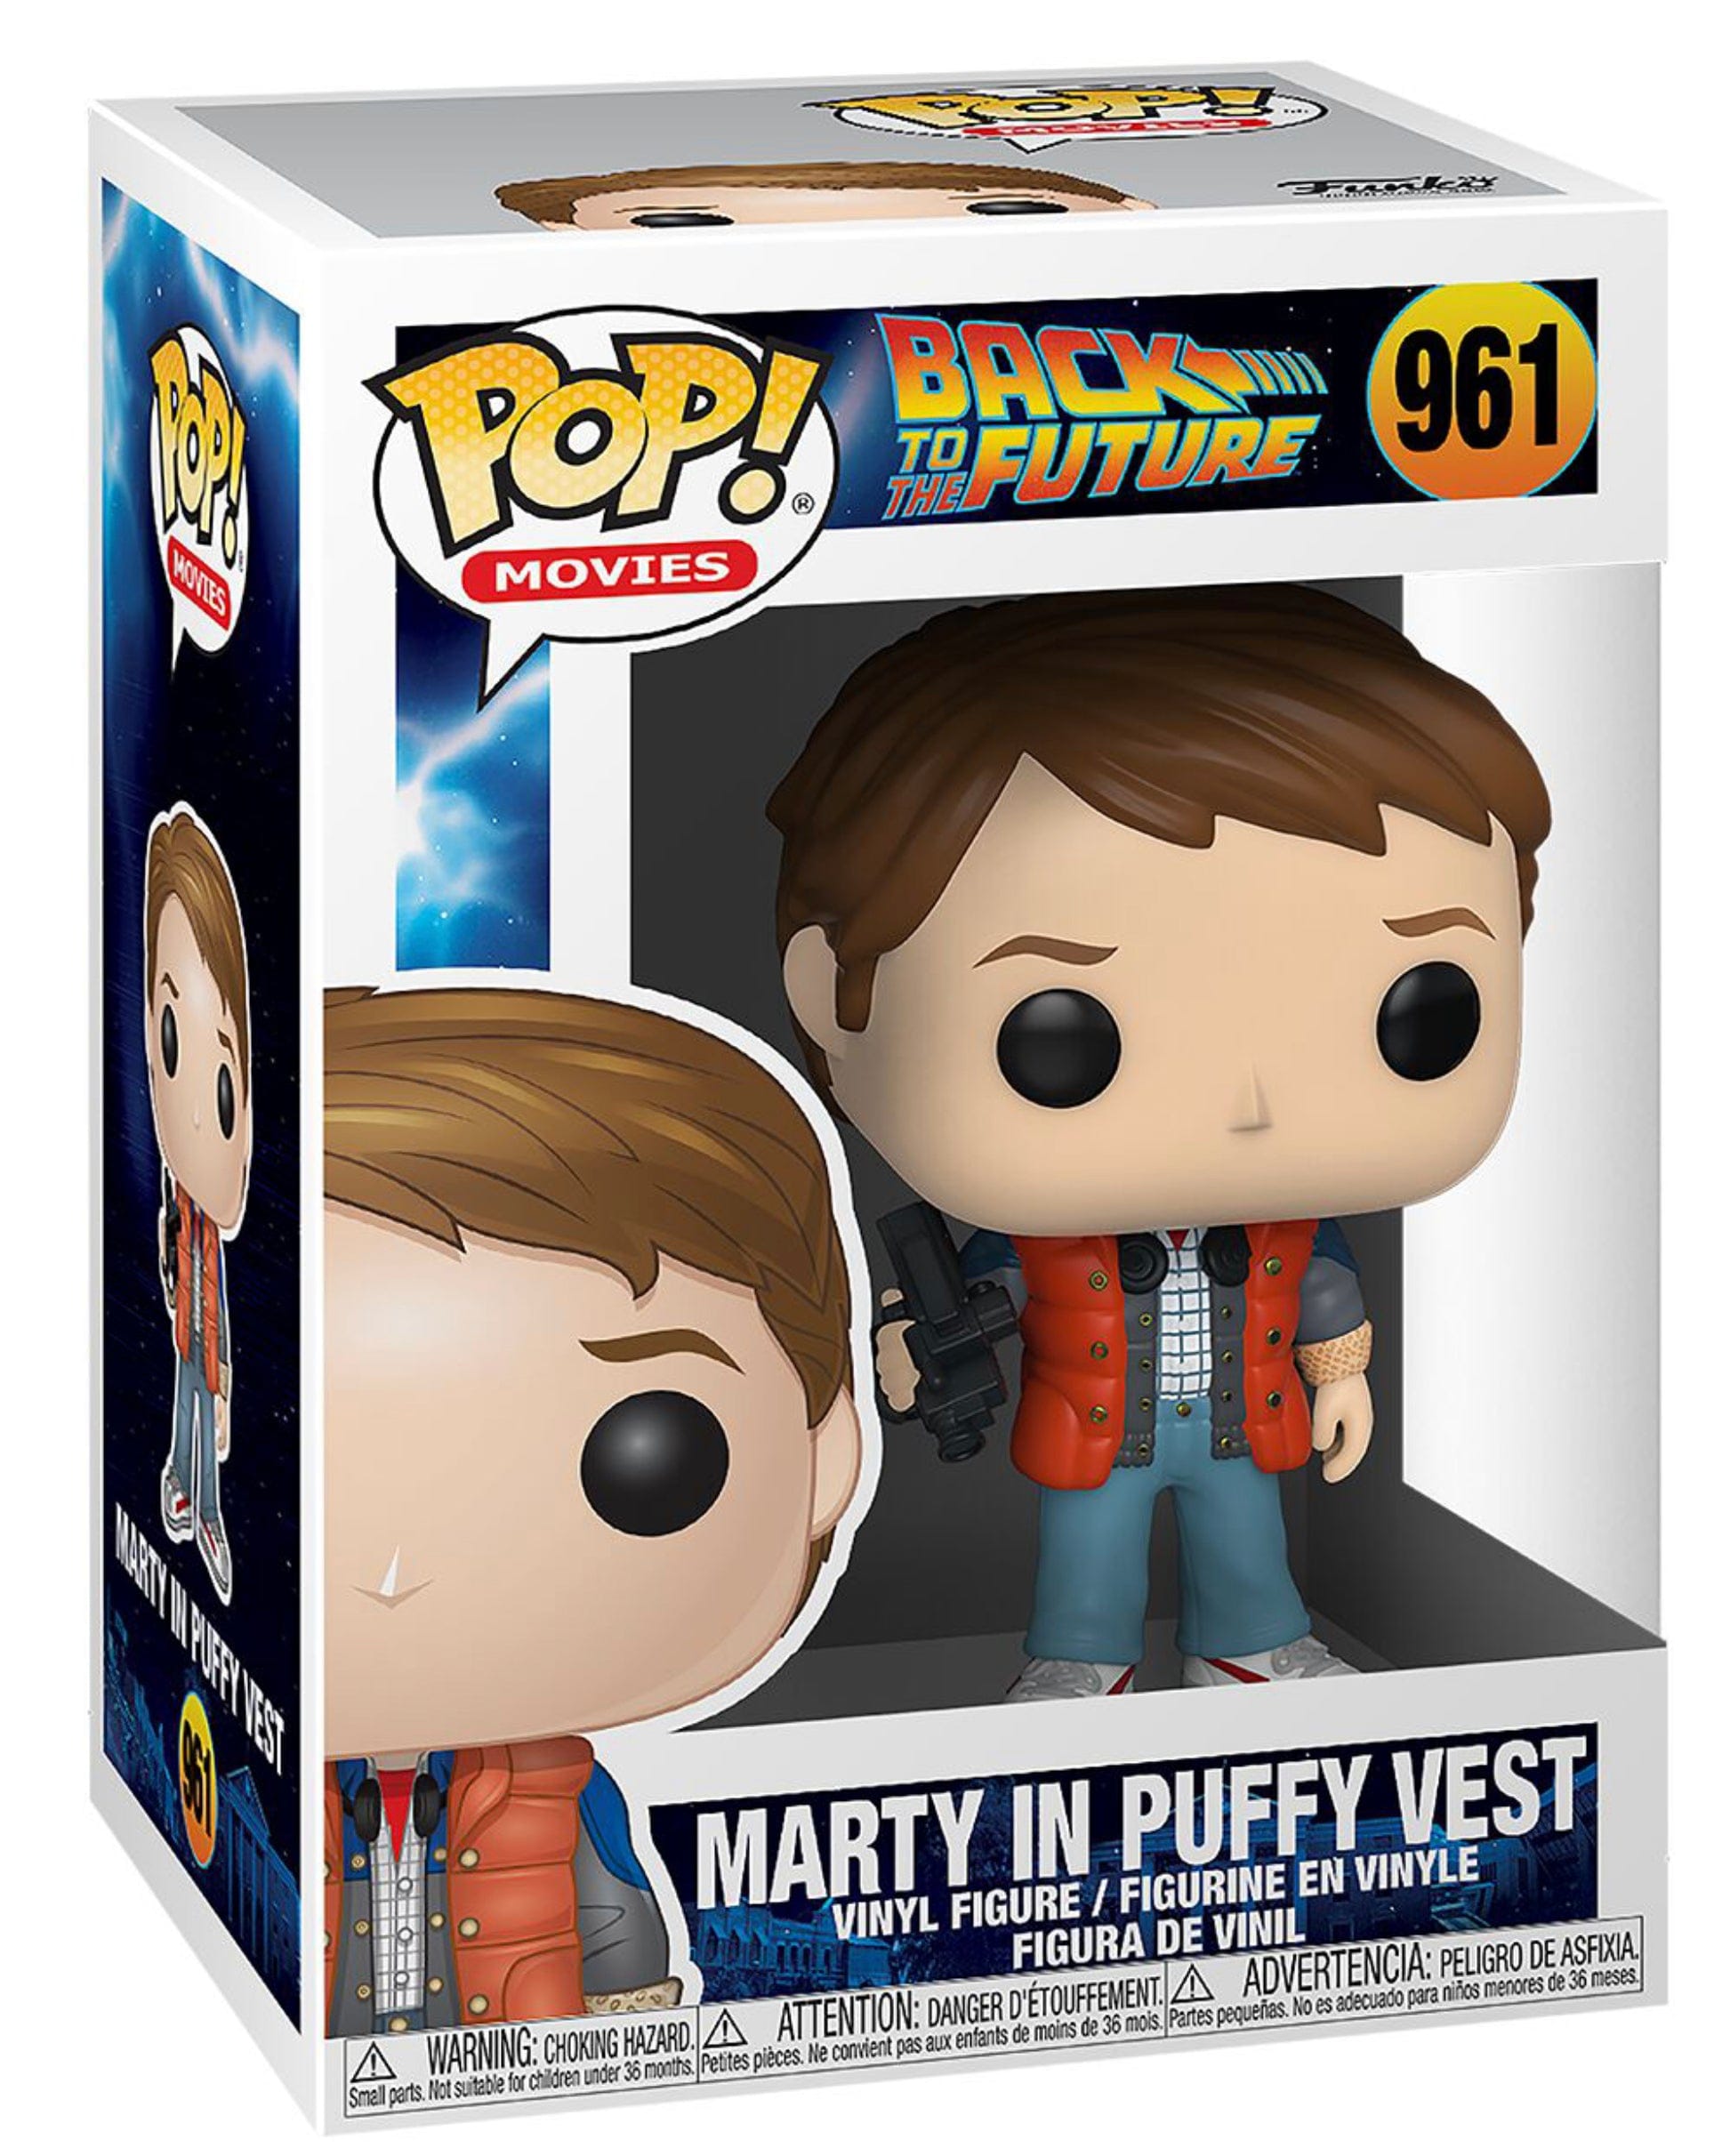 Funko Pop! Movies: Back to the Future - Marty in Puffy Vest Vinyl Figure Toy 961